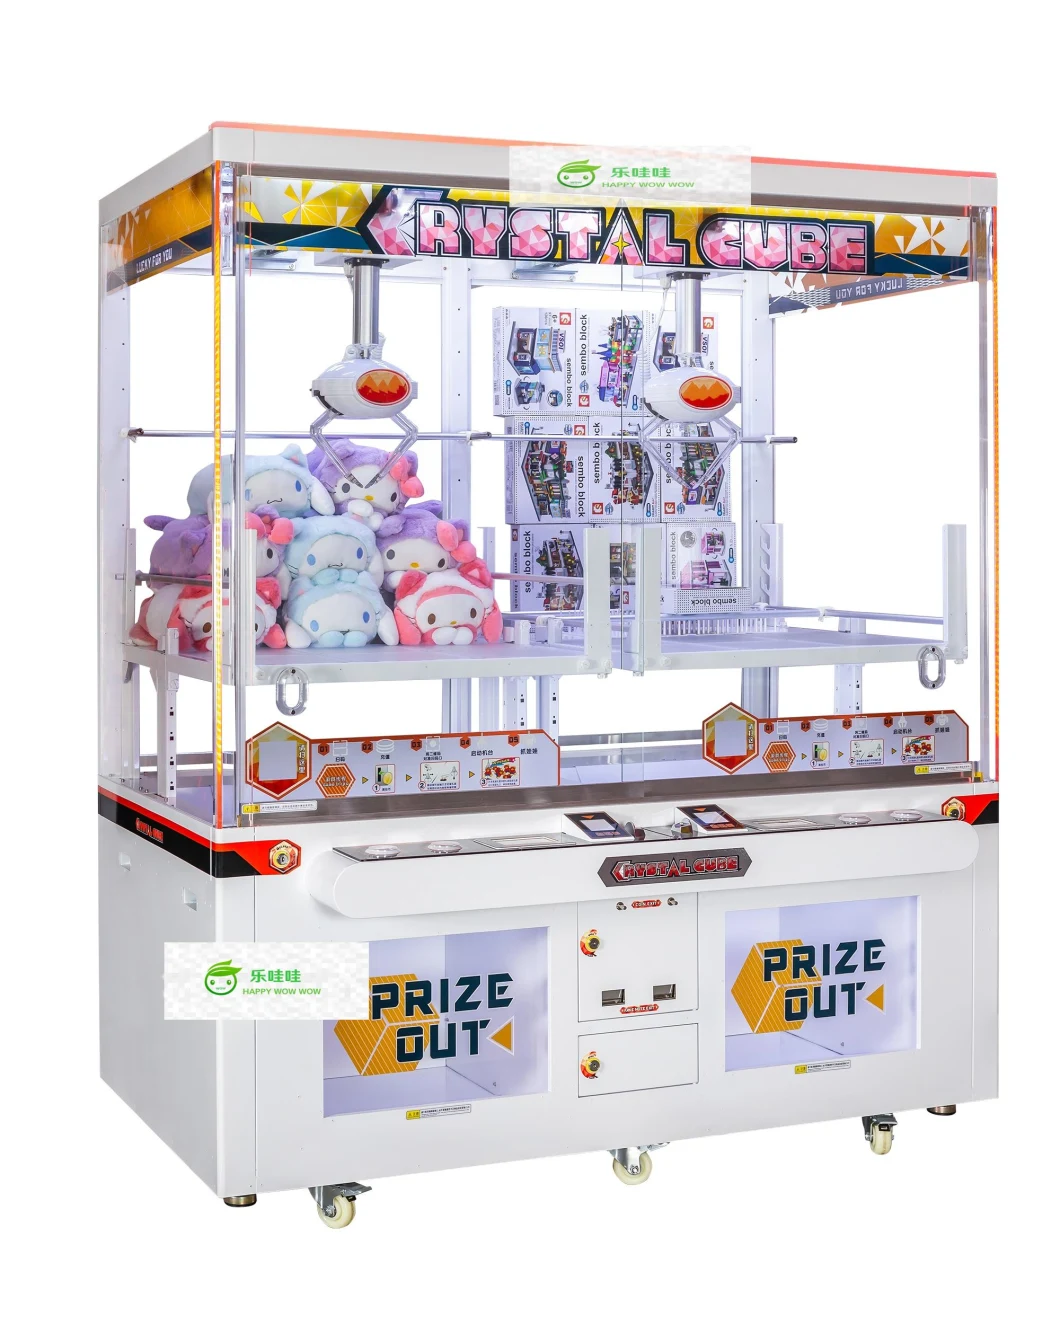 Crystal Cube Two Claw Mini Coin Pusher Key Master/Game /Claw Machine/Game Player/Arcade Game Machines/Video Game/Amusement Machine/Arcade Machine/Game Machine